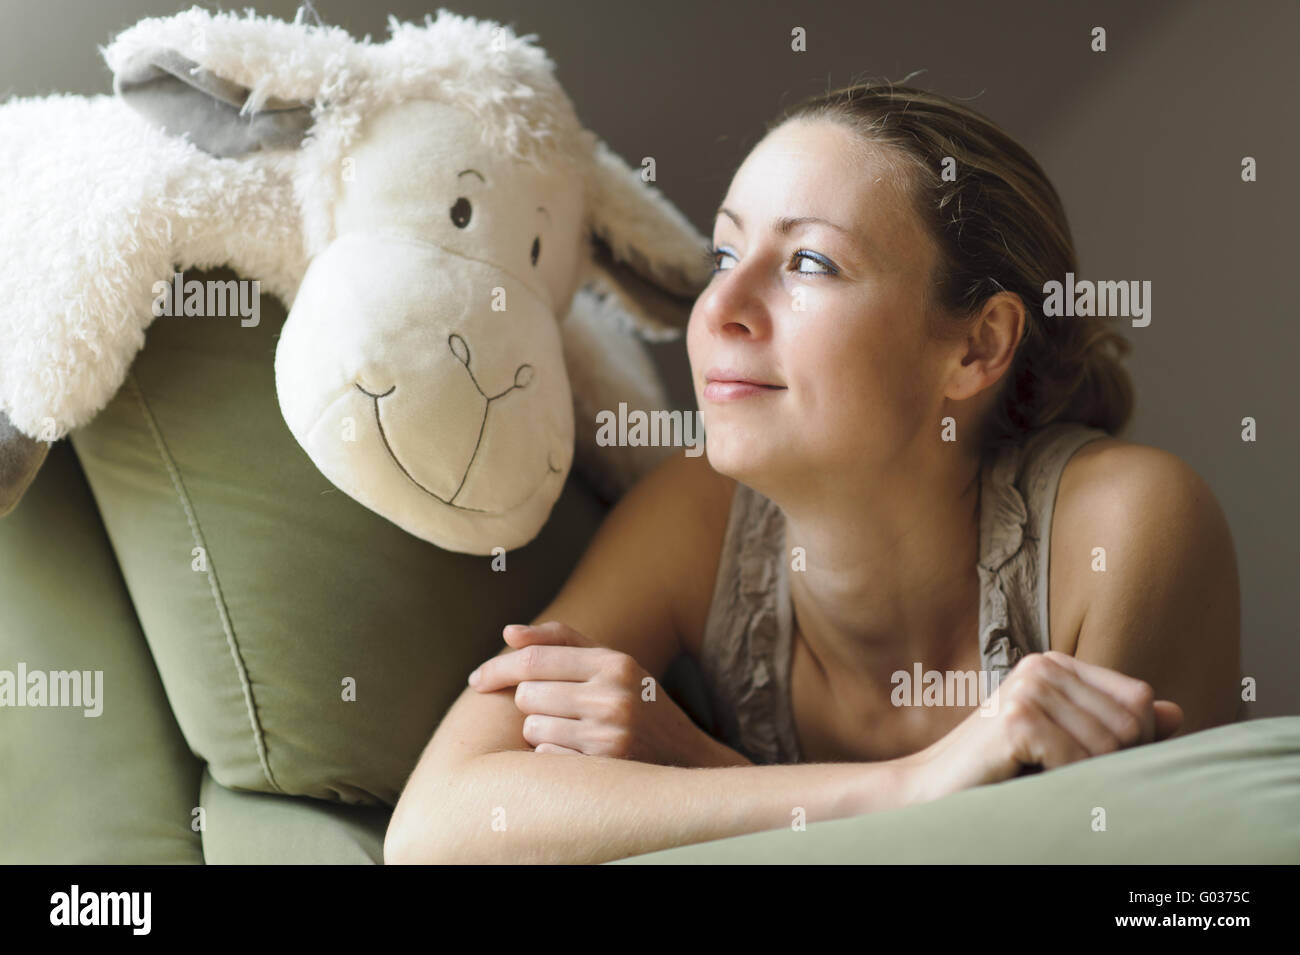 young woman lying on the couch with a stuffed anim Stock Photo